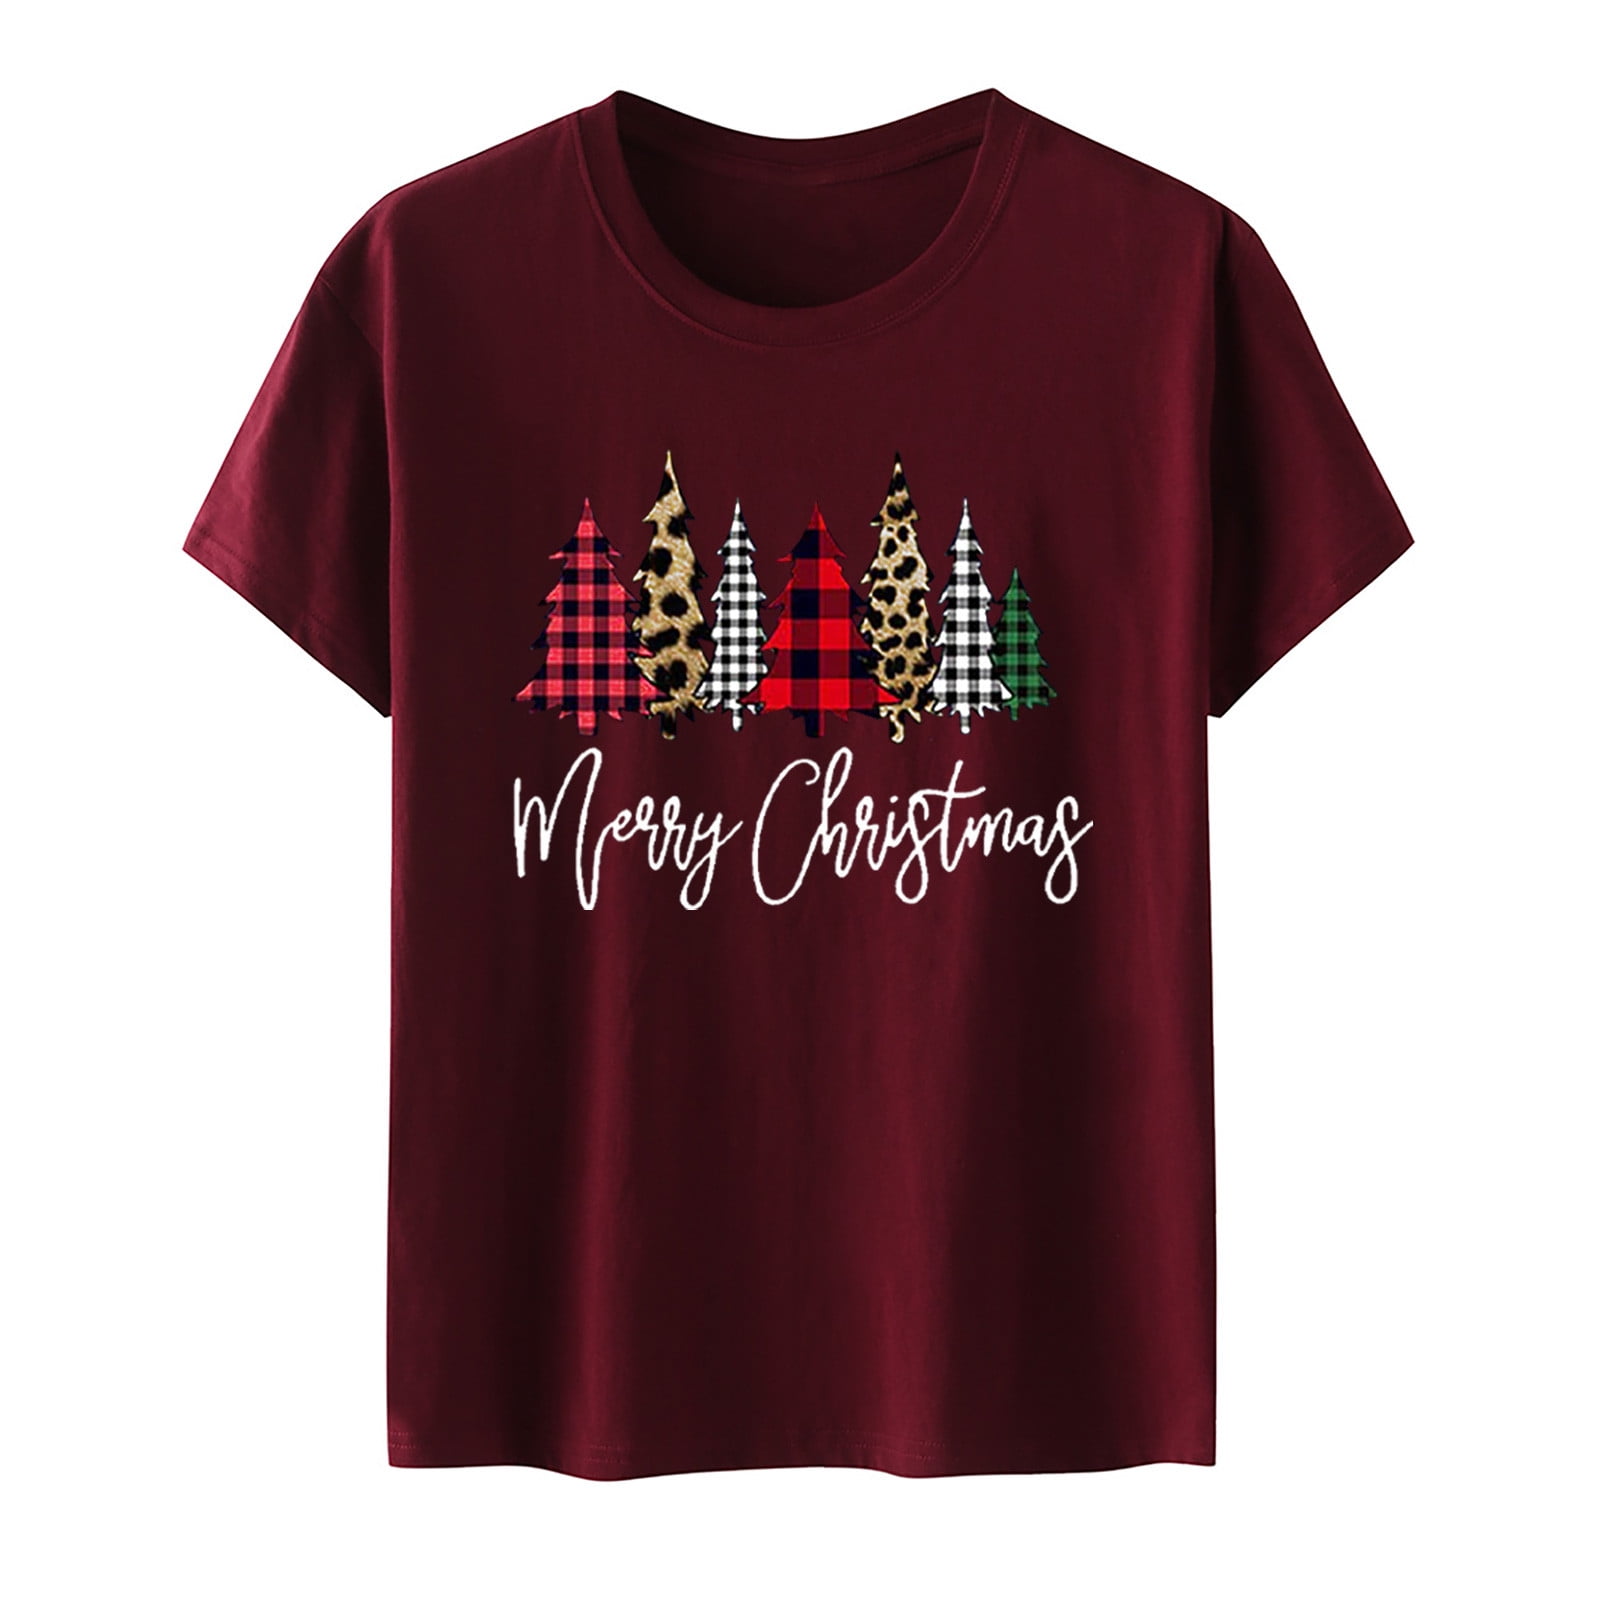  CHUOAND Merry Christmas Of Womens Print,dollar store